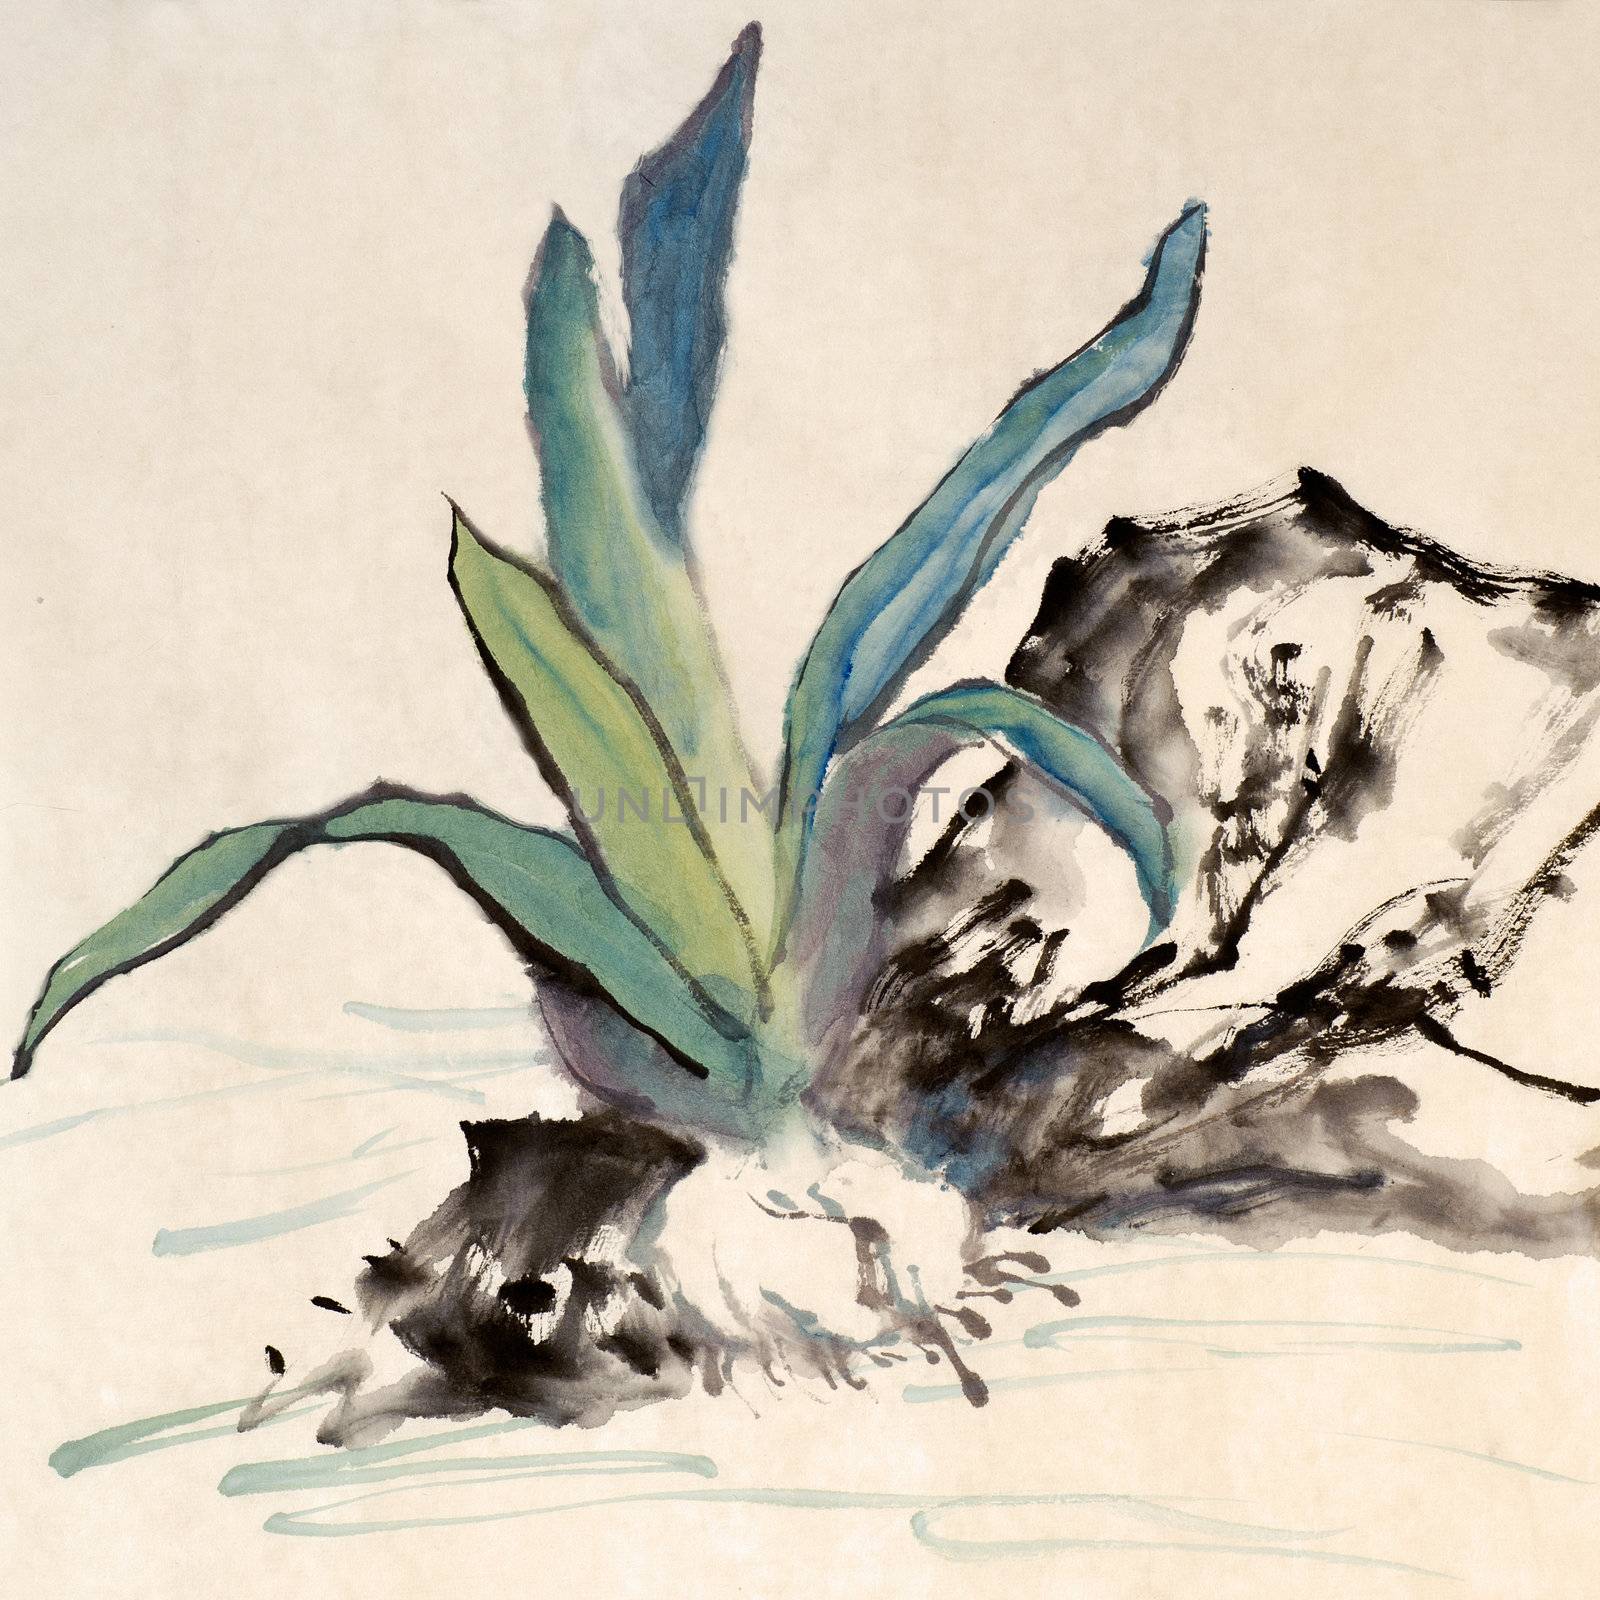 Chinese painting of garlic on art paper.